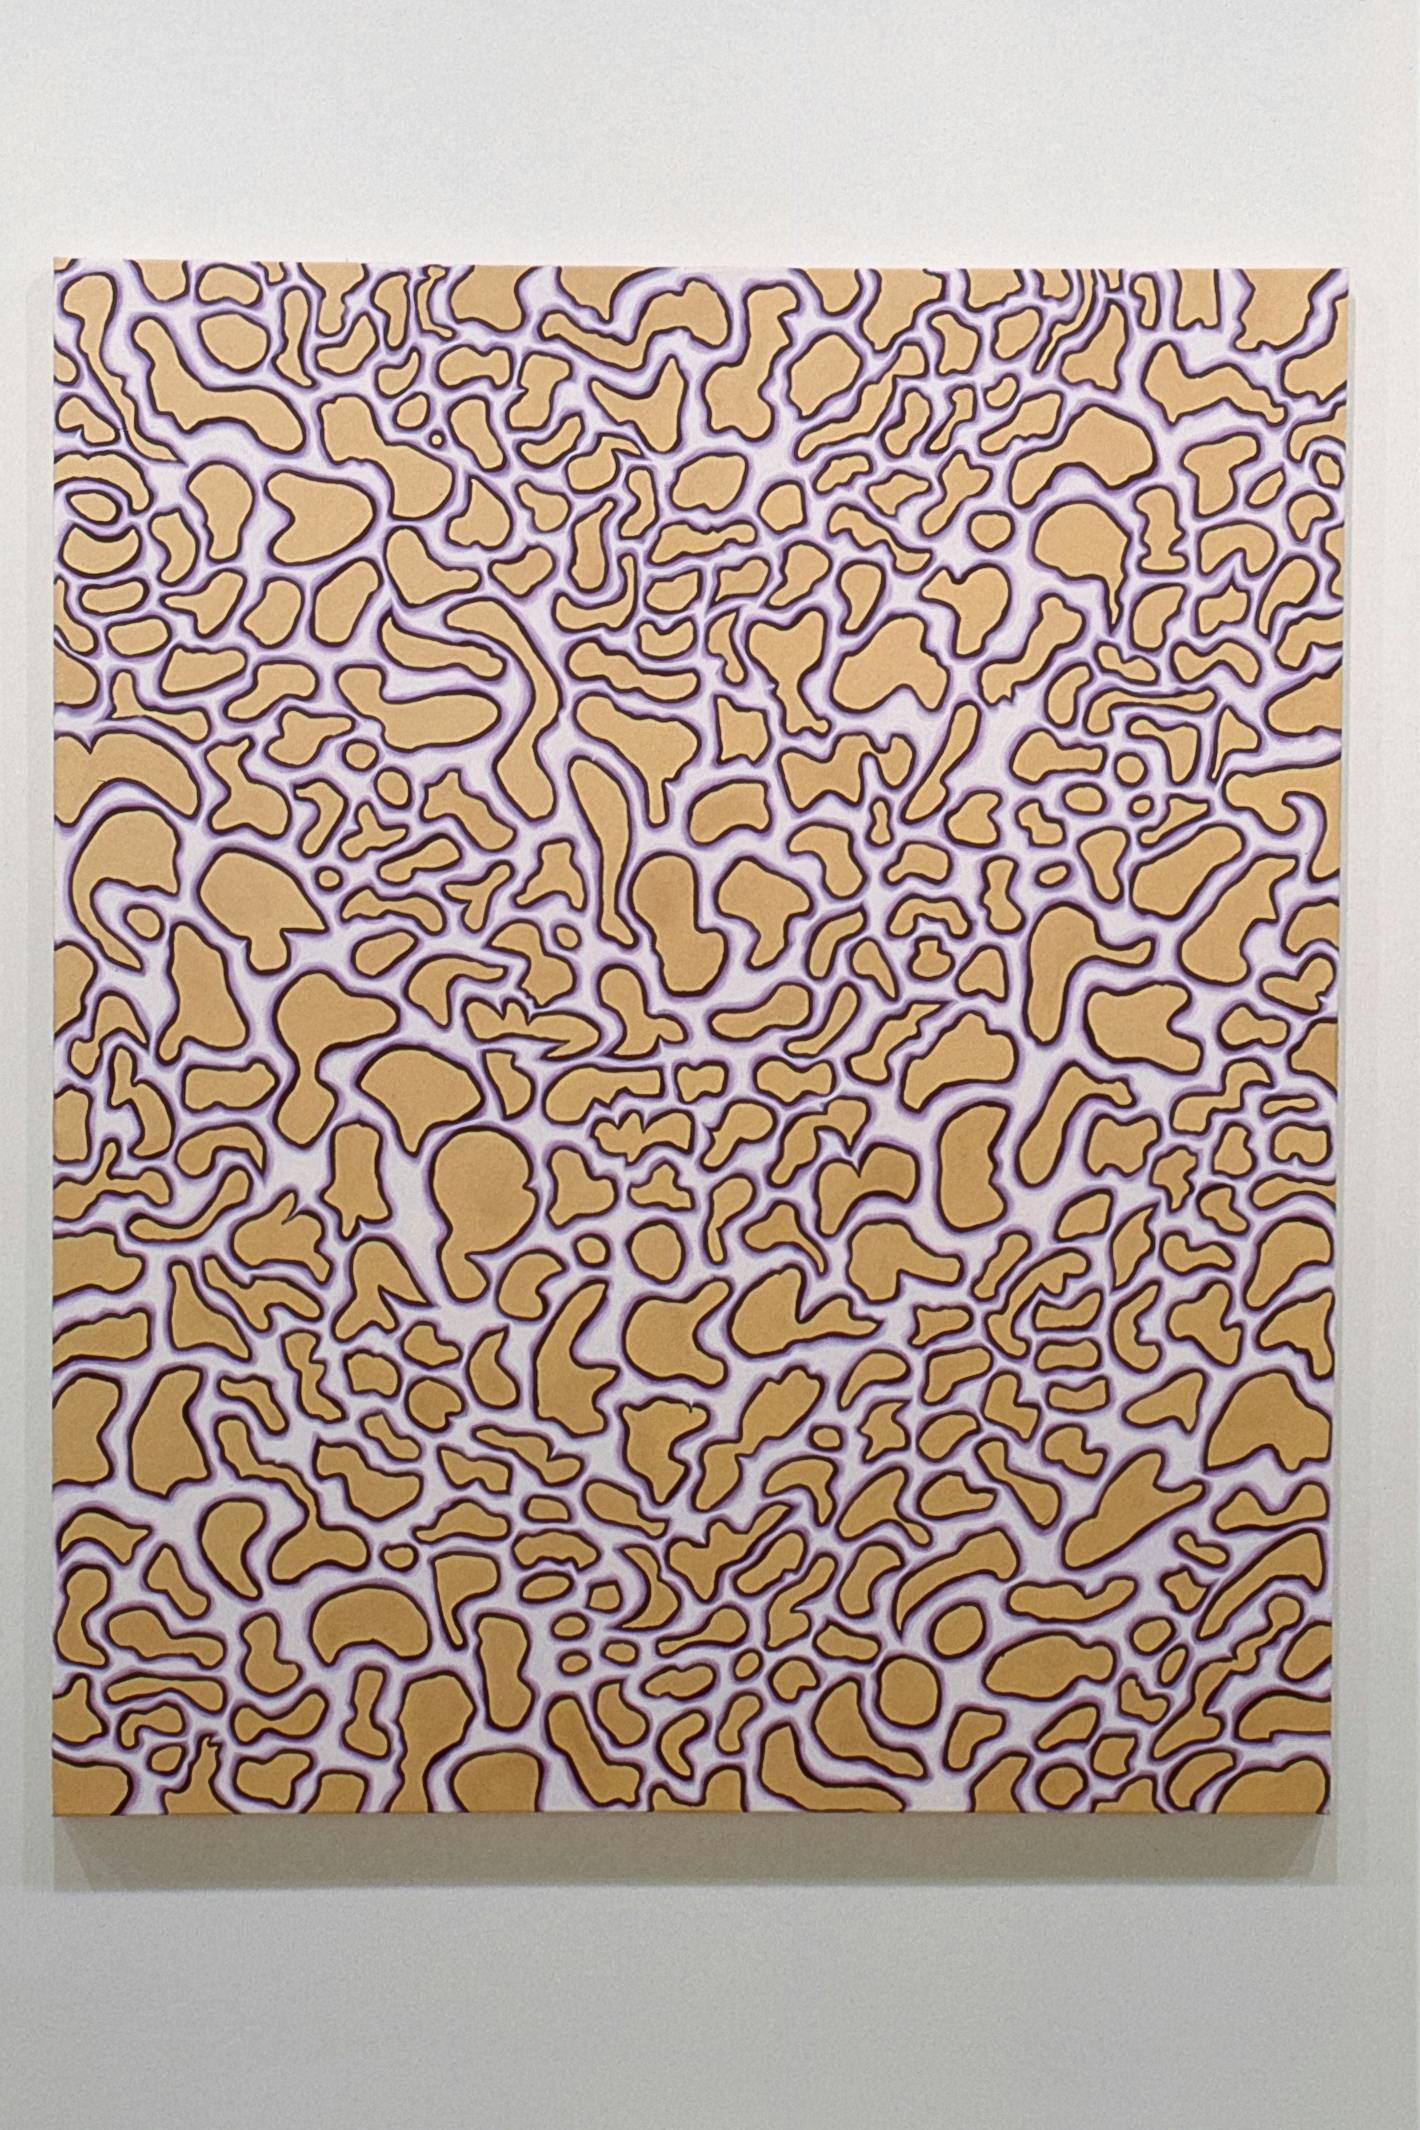 A large-sized abstract painting is installed on the gallery wall. The painting has a gold leopard-pattern on a white background. Contours of all gold figures are shadowed by purple thin lines. 